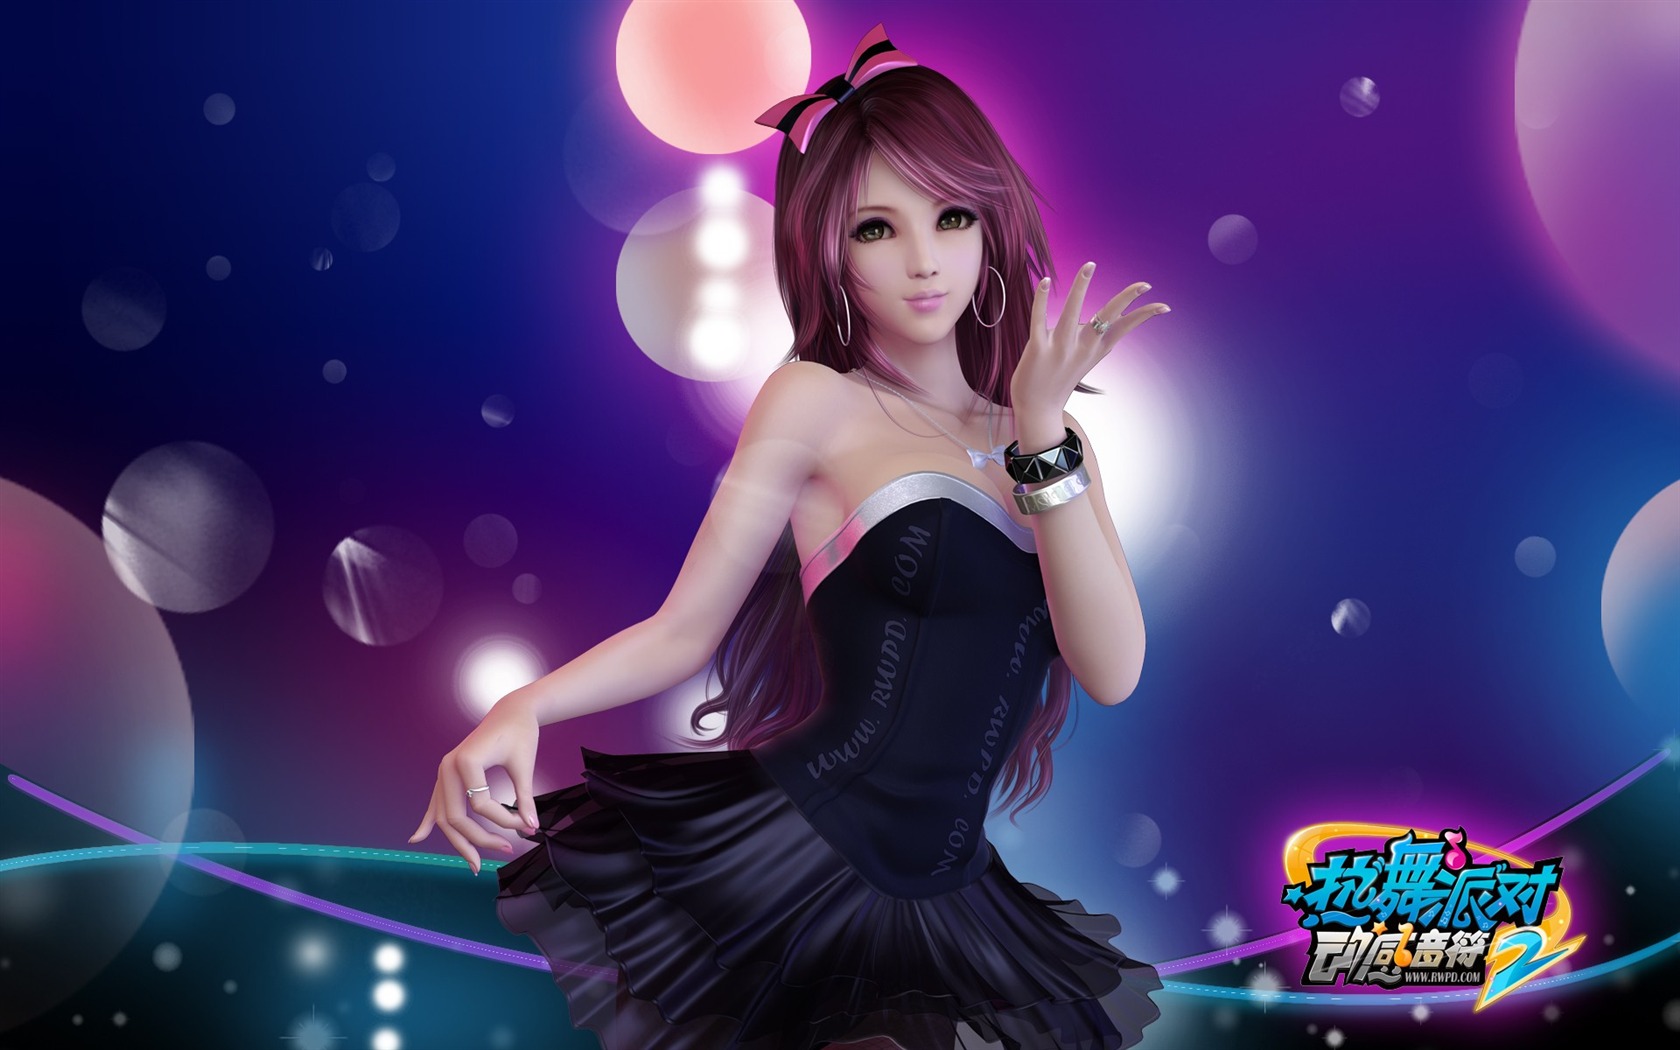 Online game Hot Dance Party II official wallpapers #32 - 1680x1050